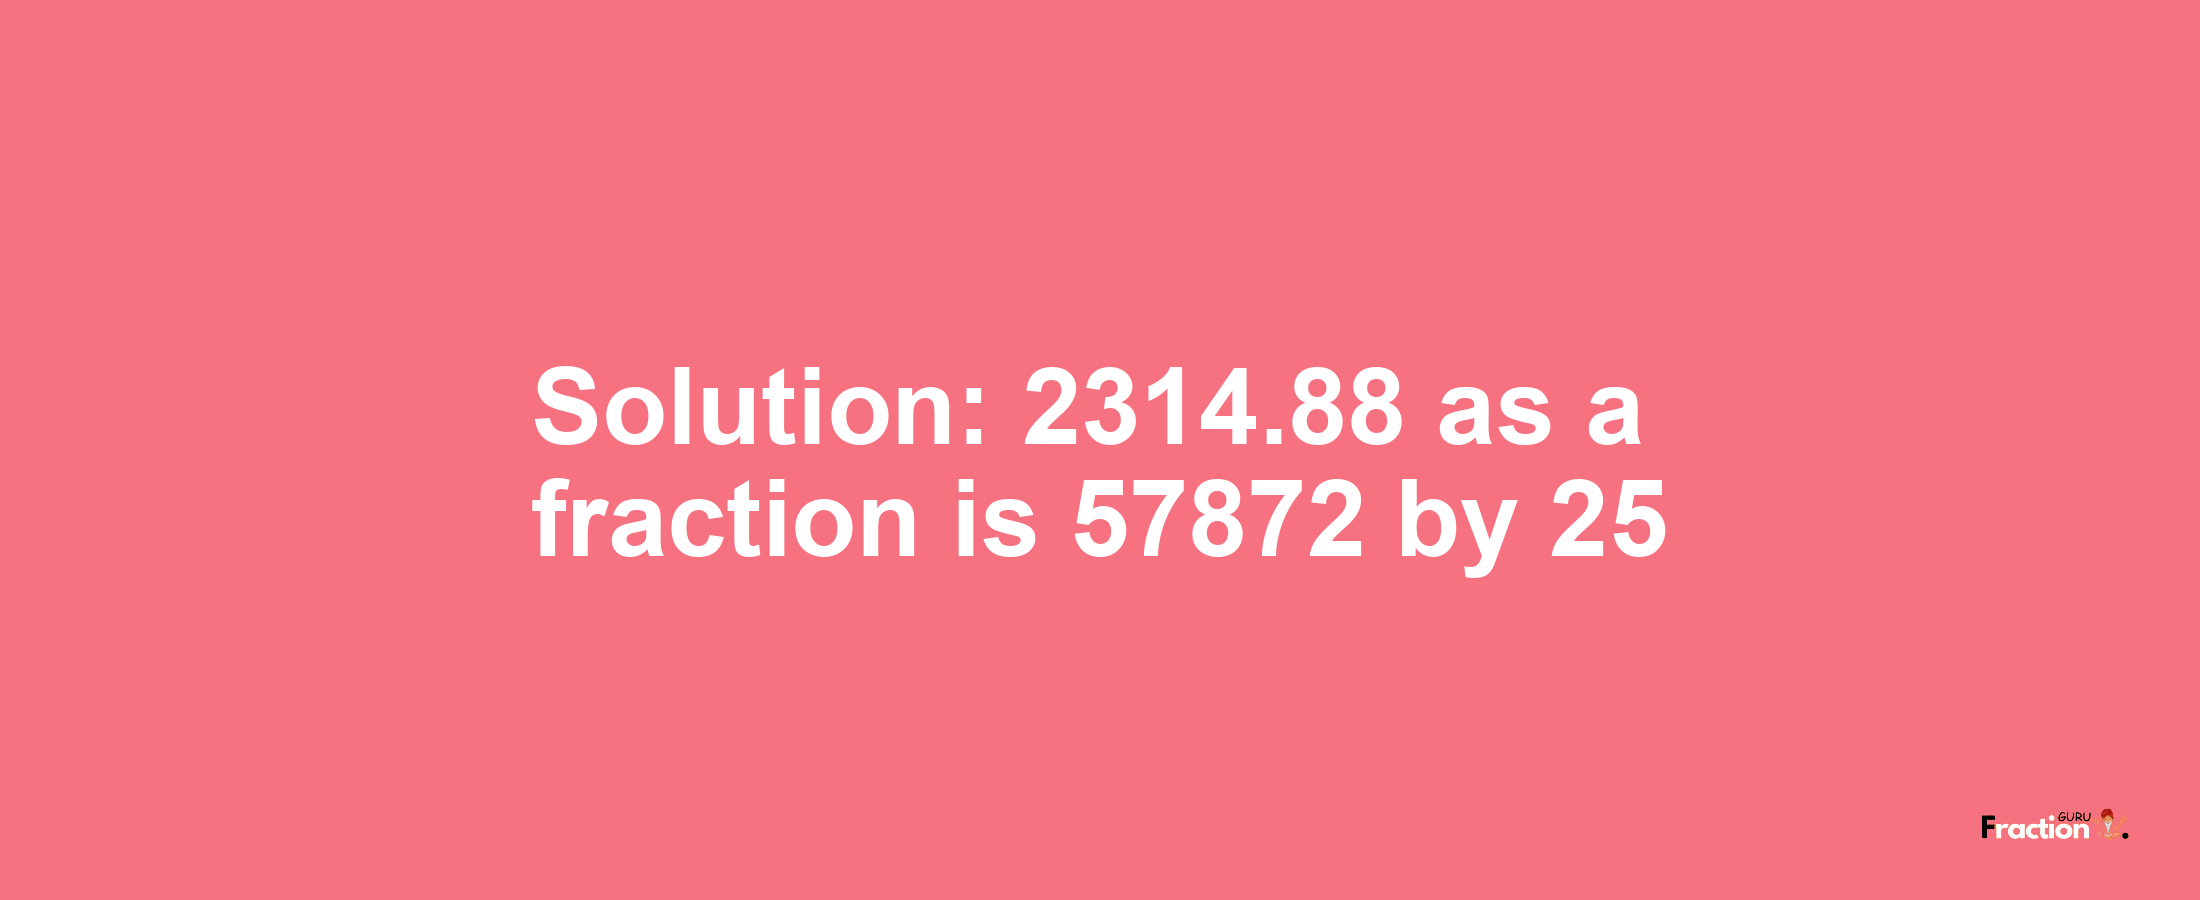 Solution:2314.88 as a fraction is 57872/25